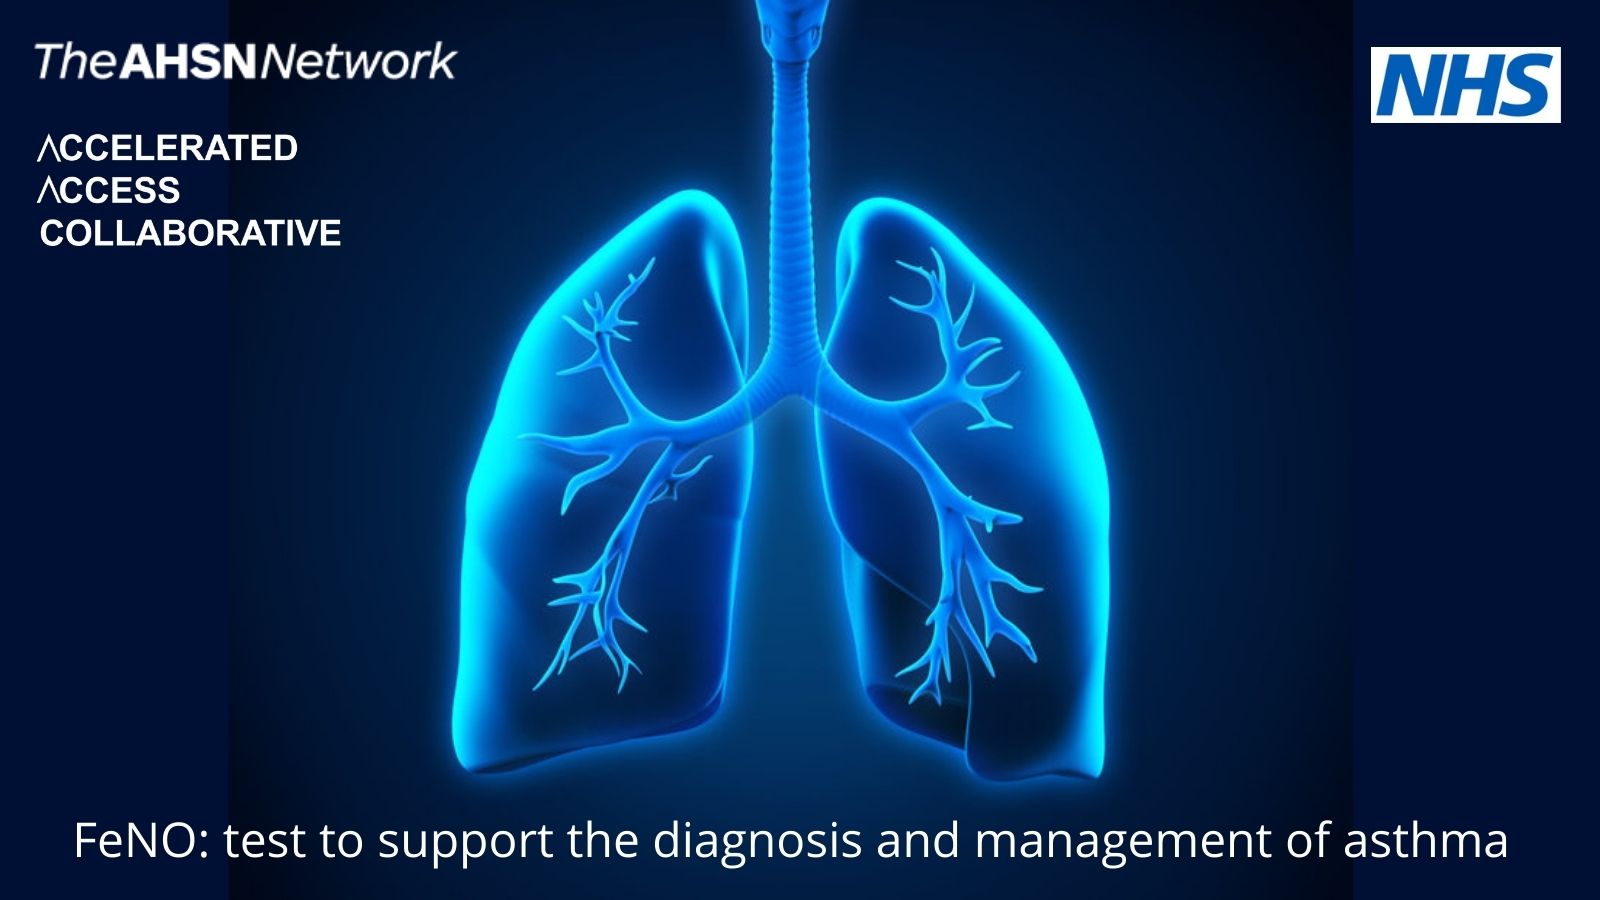 FeNO: Test to support the diagnosis and management of asthma